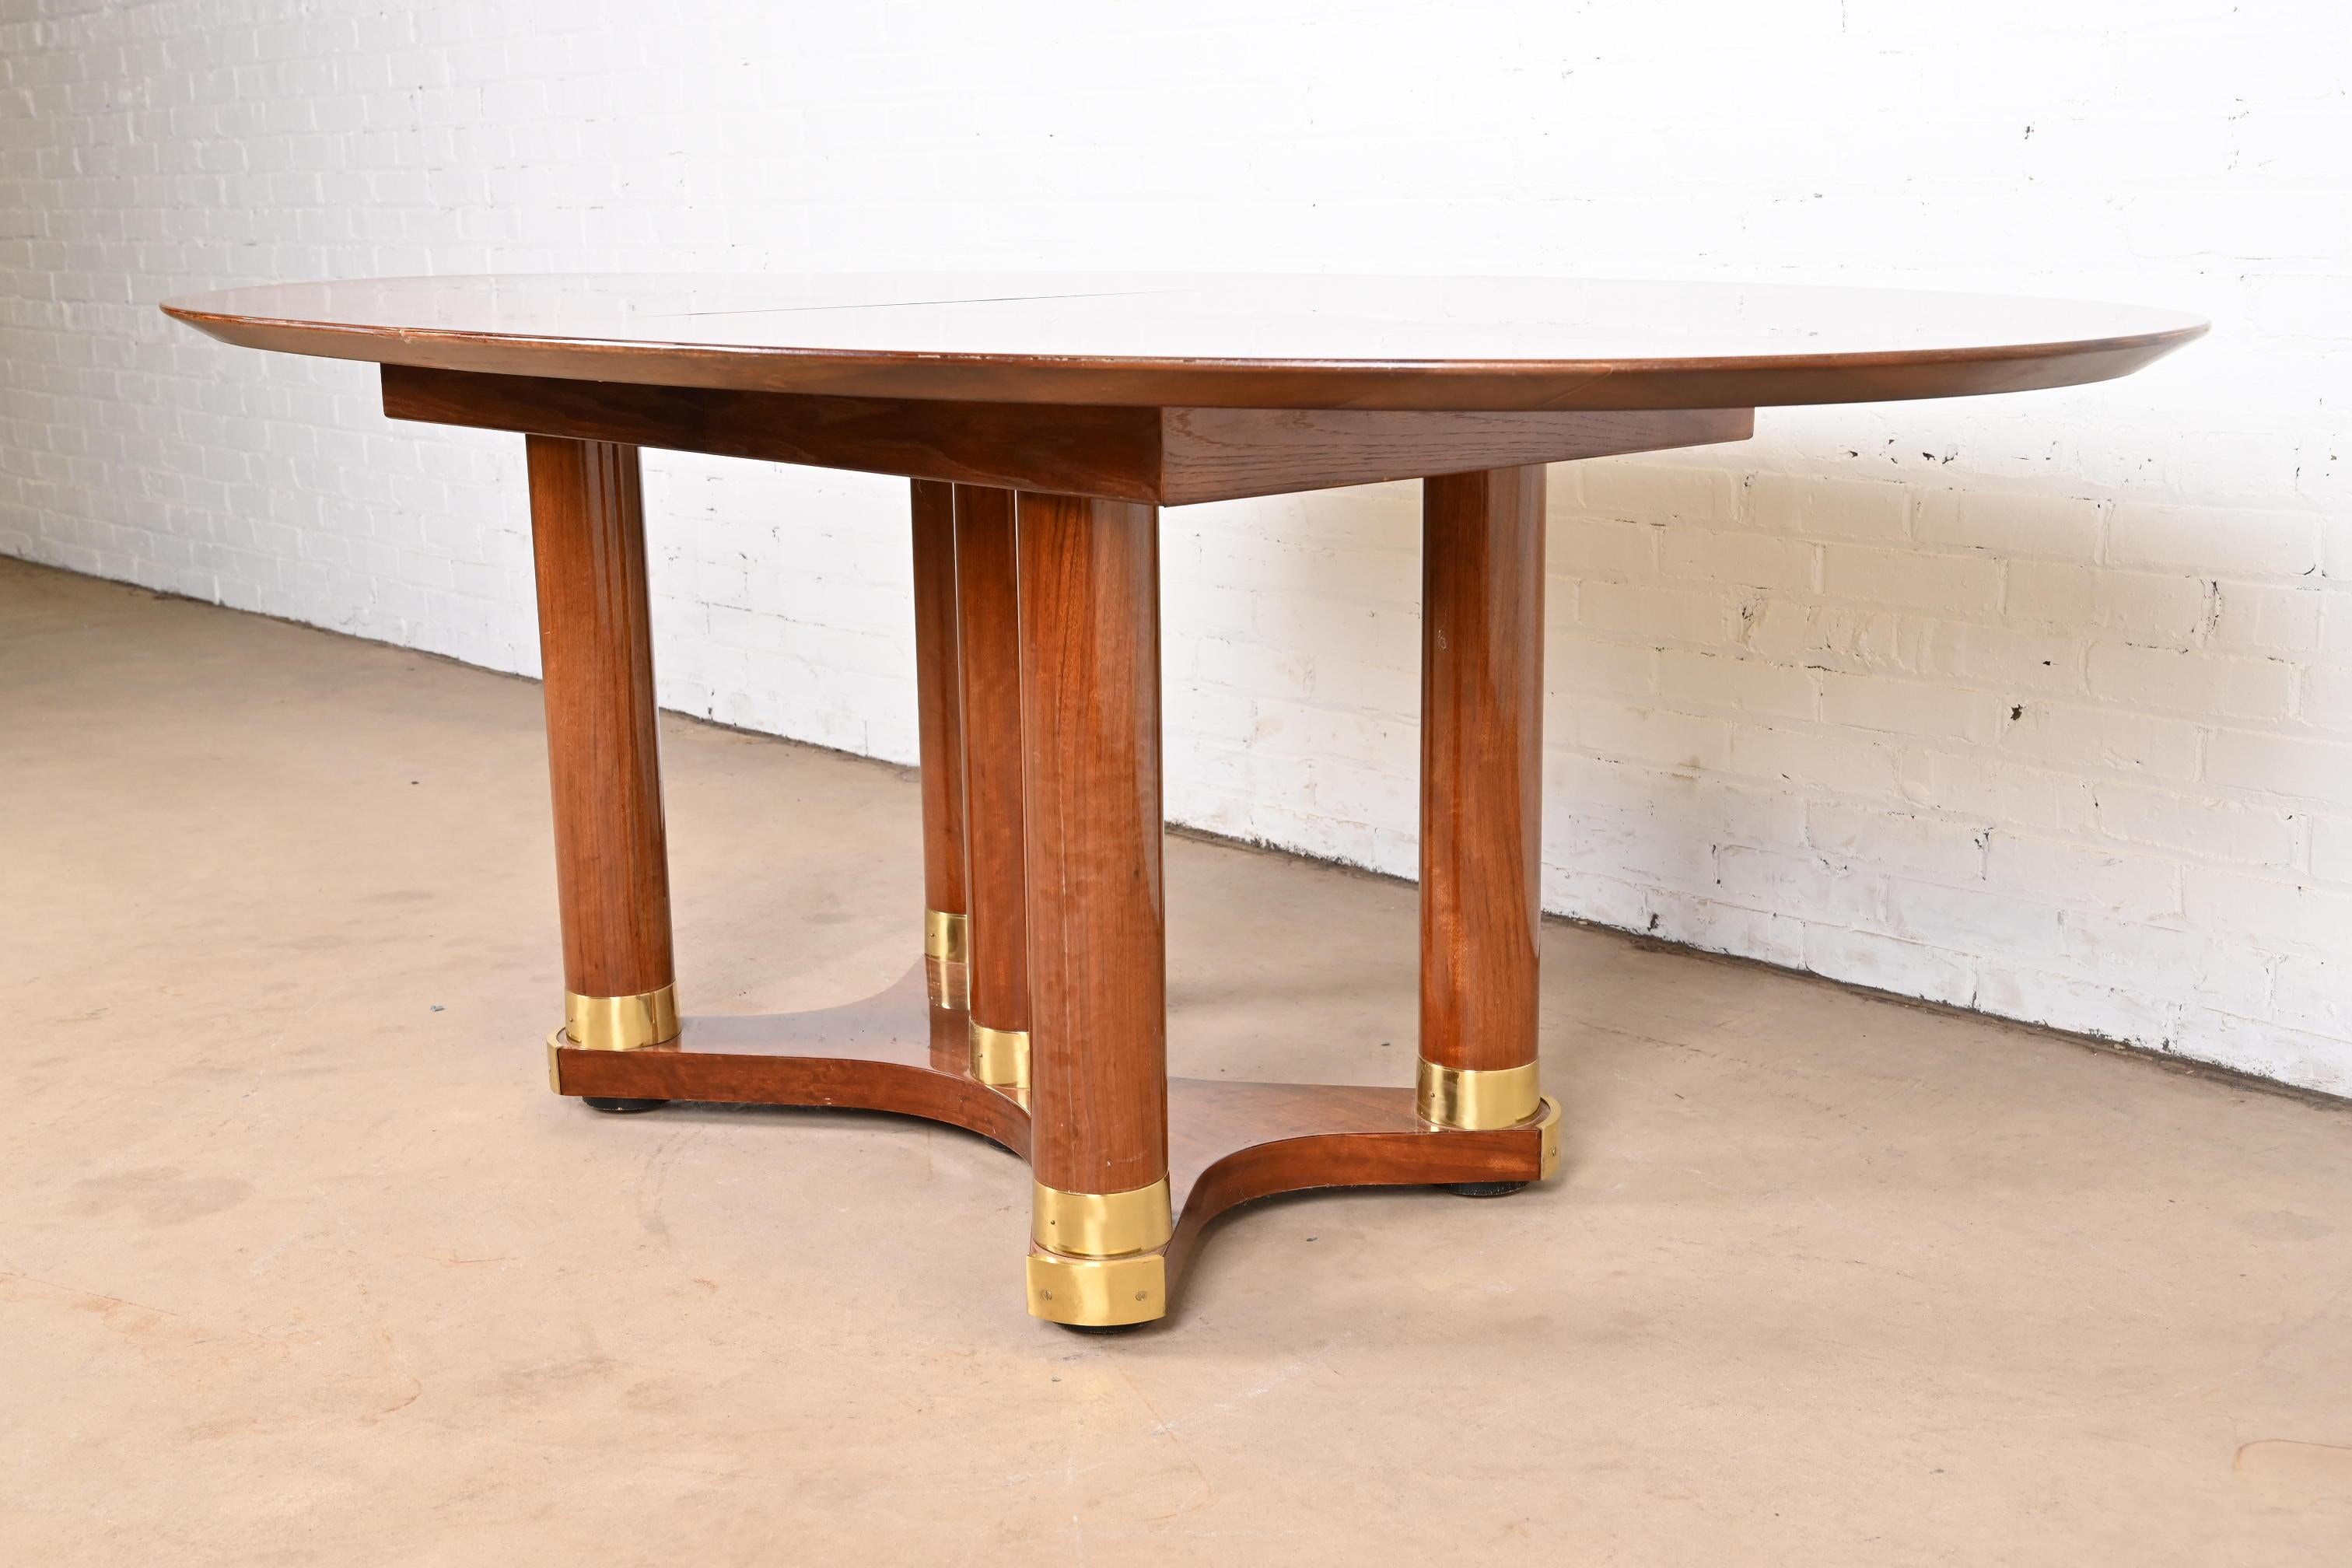 20th Century Henredon French Empire Pedestal Dining Table in Exotic Brazilian Daniella Wood For Sale